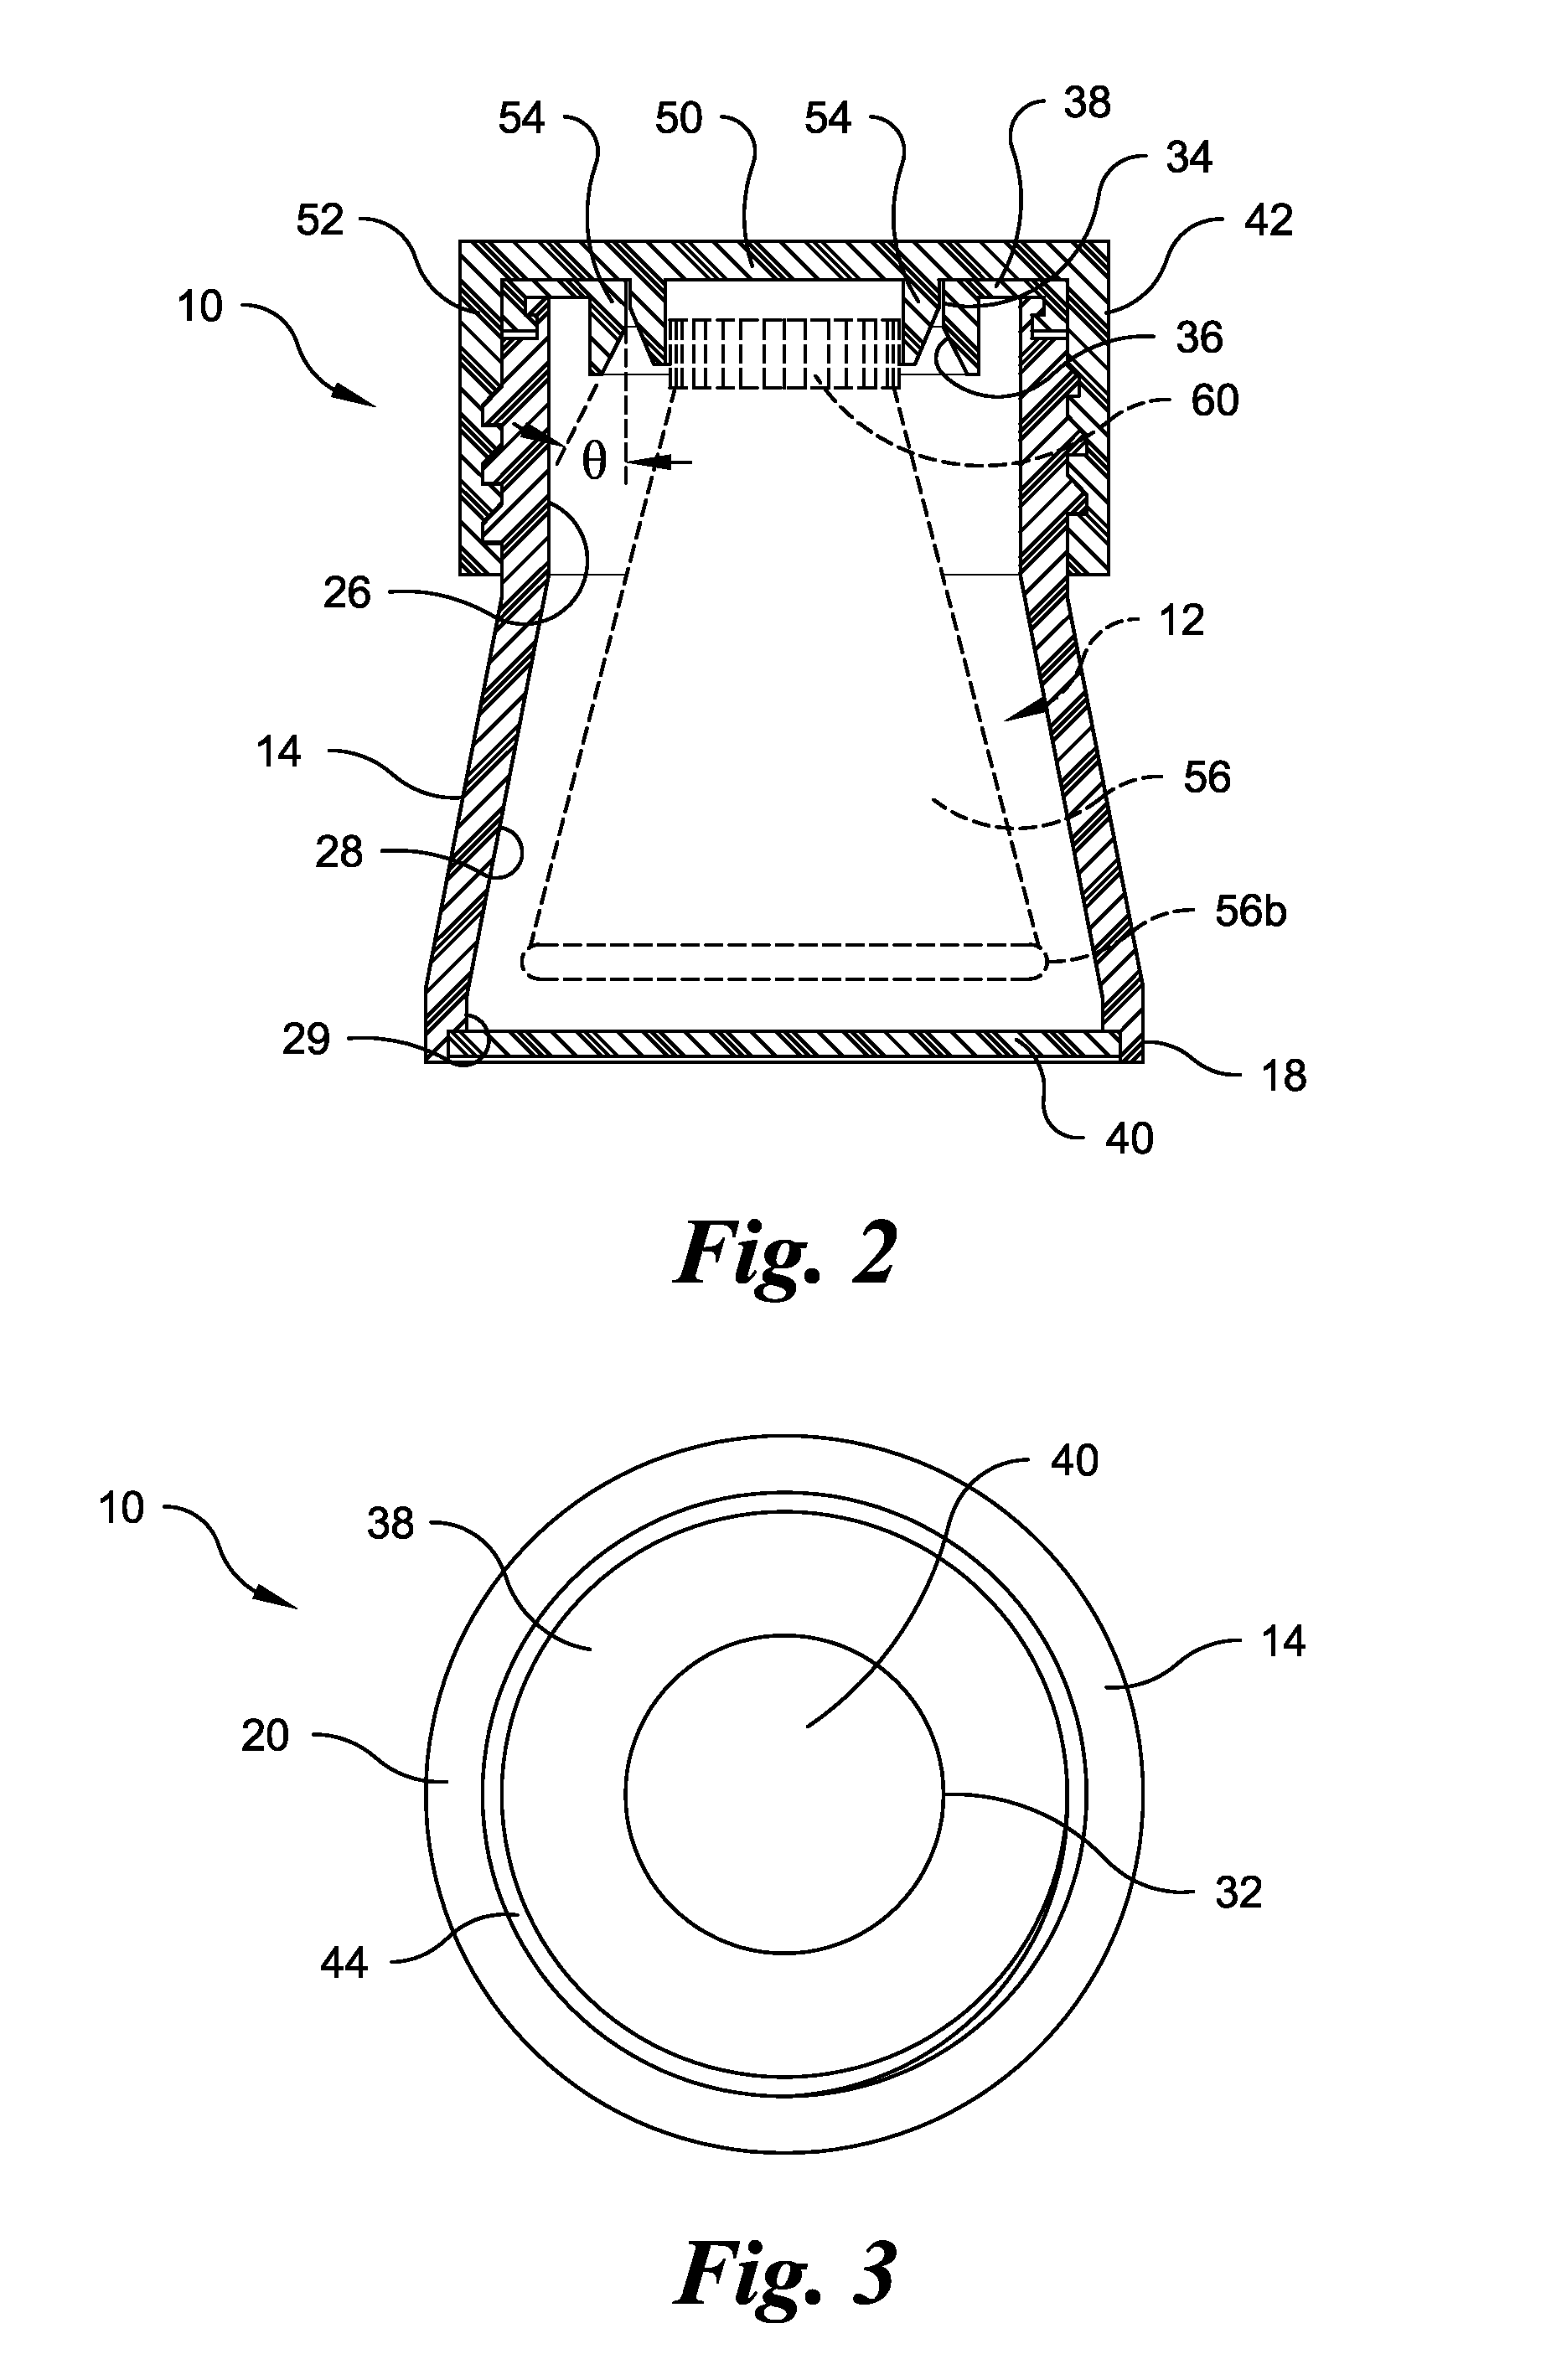 Combination child-resistant package and collapsible tube, and method of using same